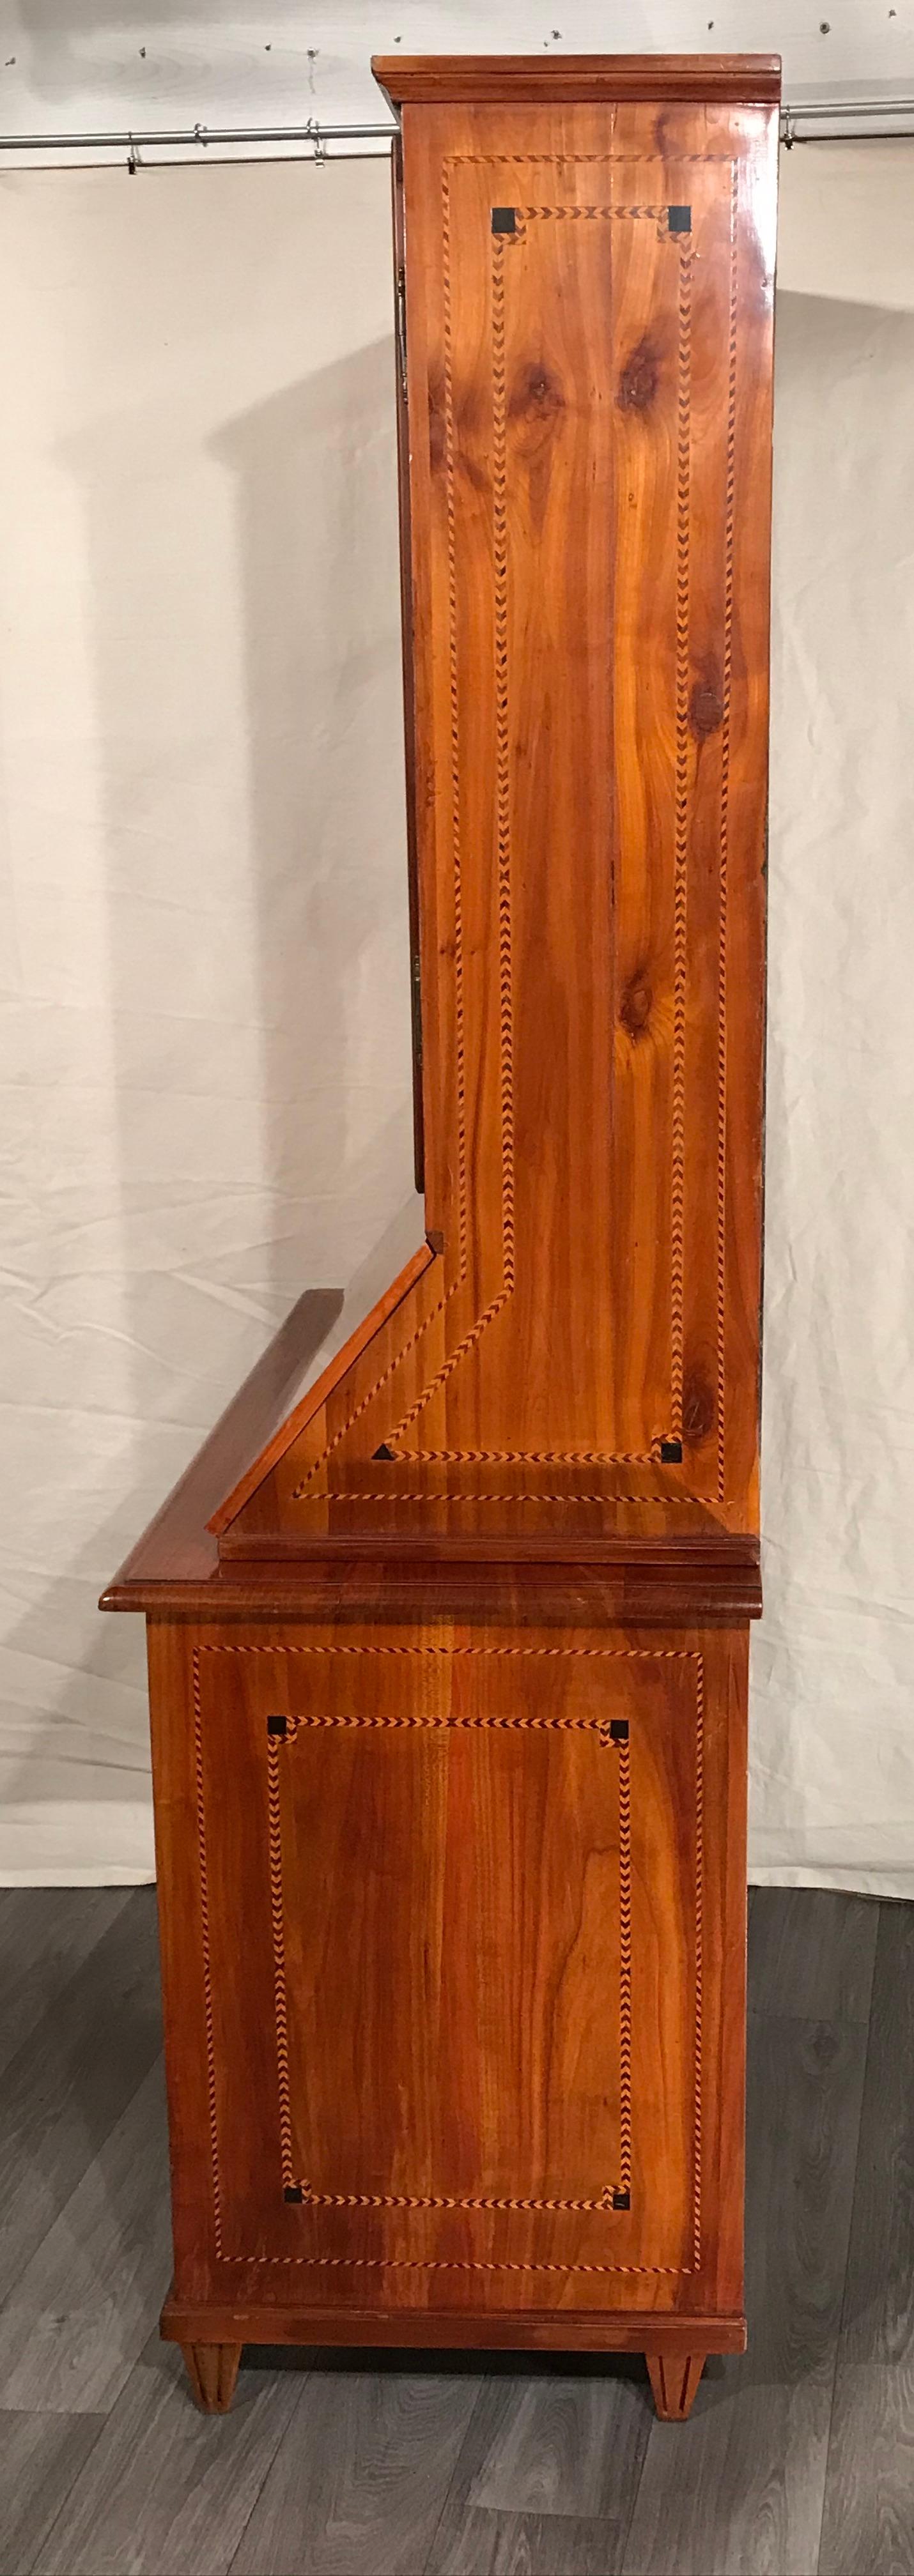 Louis XVI Secretary Bookcase, South German 1780, Cherry In Good Condition For Sale In Belmont, MA